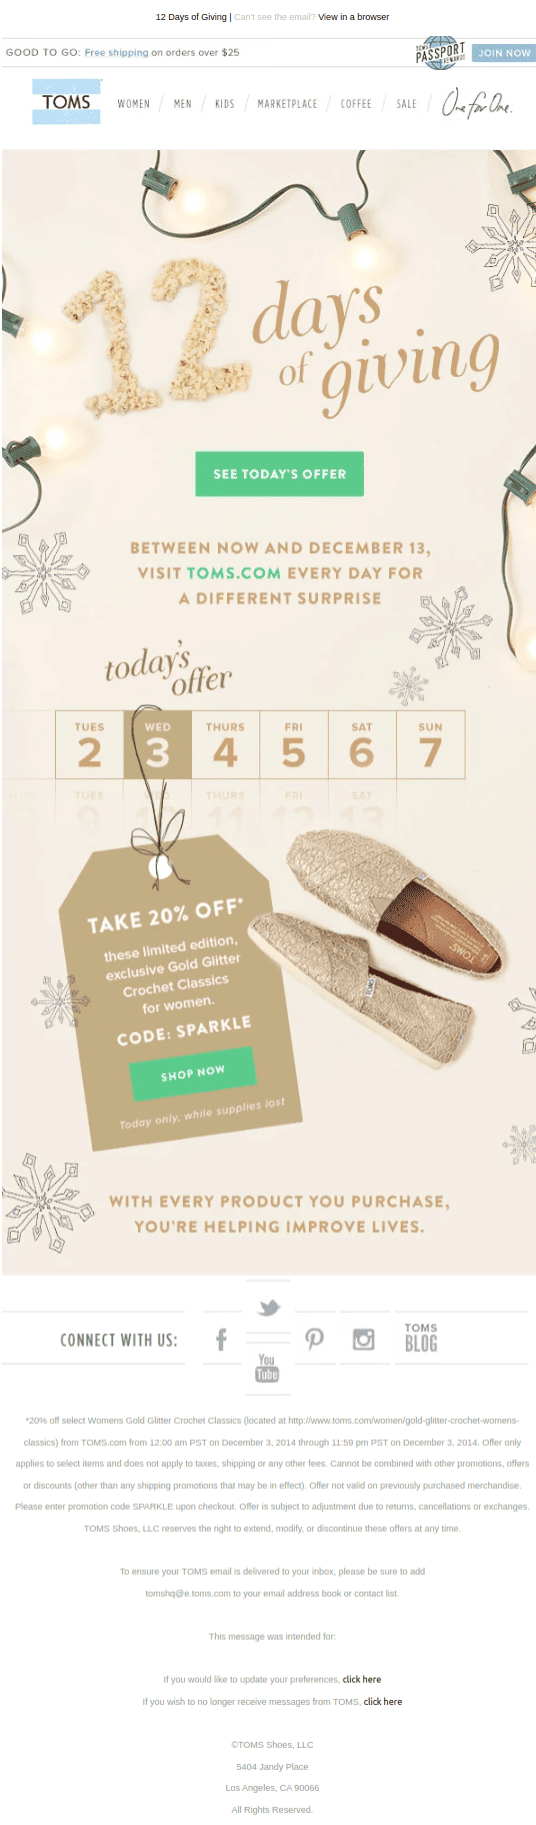 Toms 12 Days of Giving email